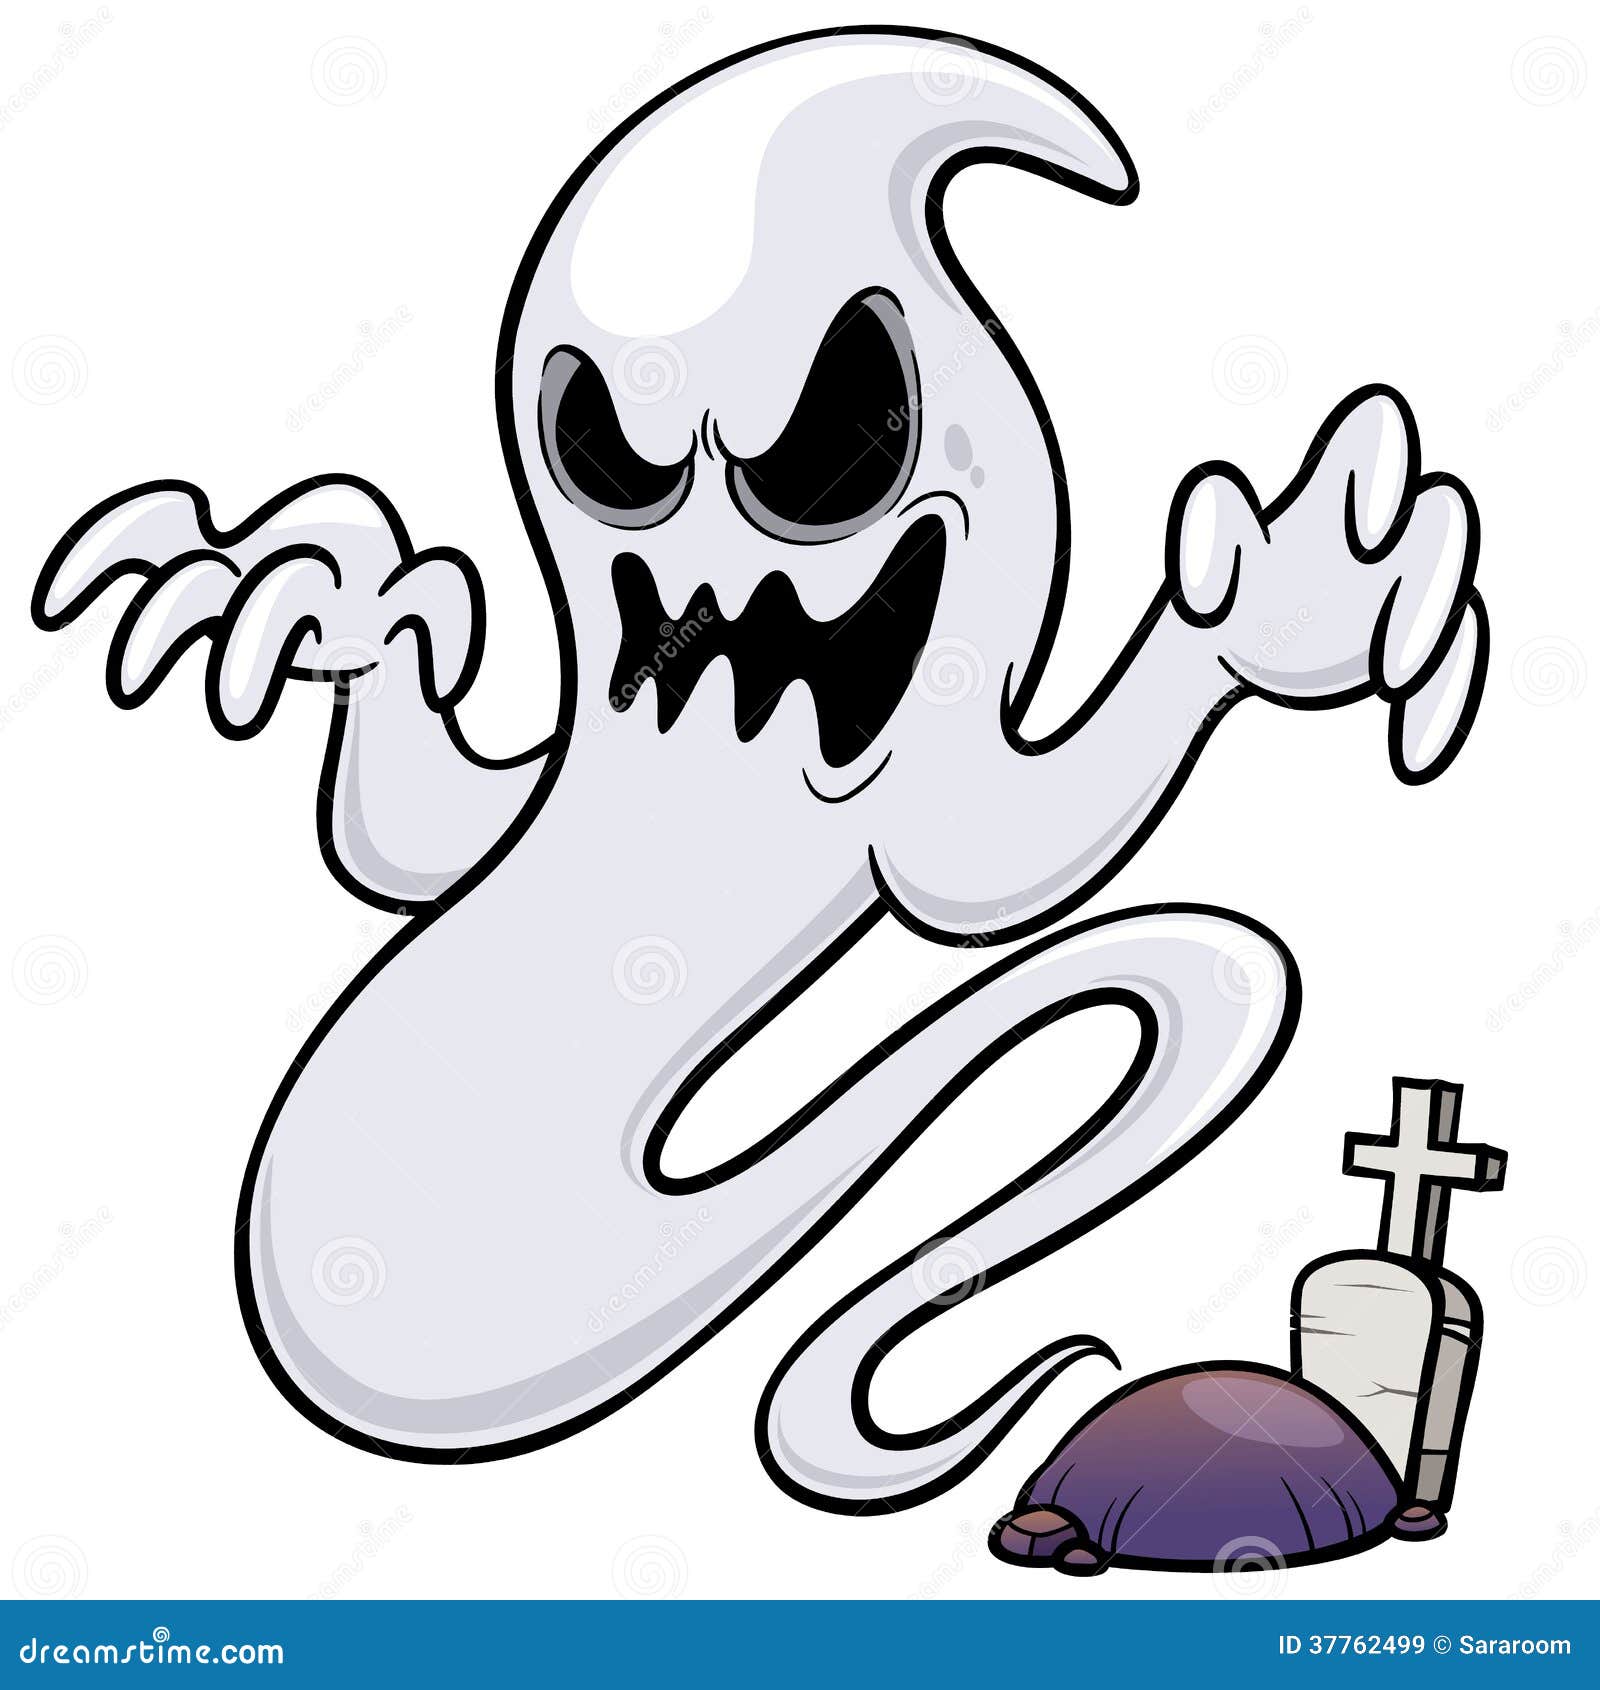 Ghost cartoon stock vector. Illustration of character - 37762499